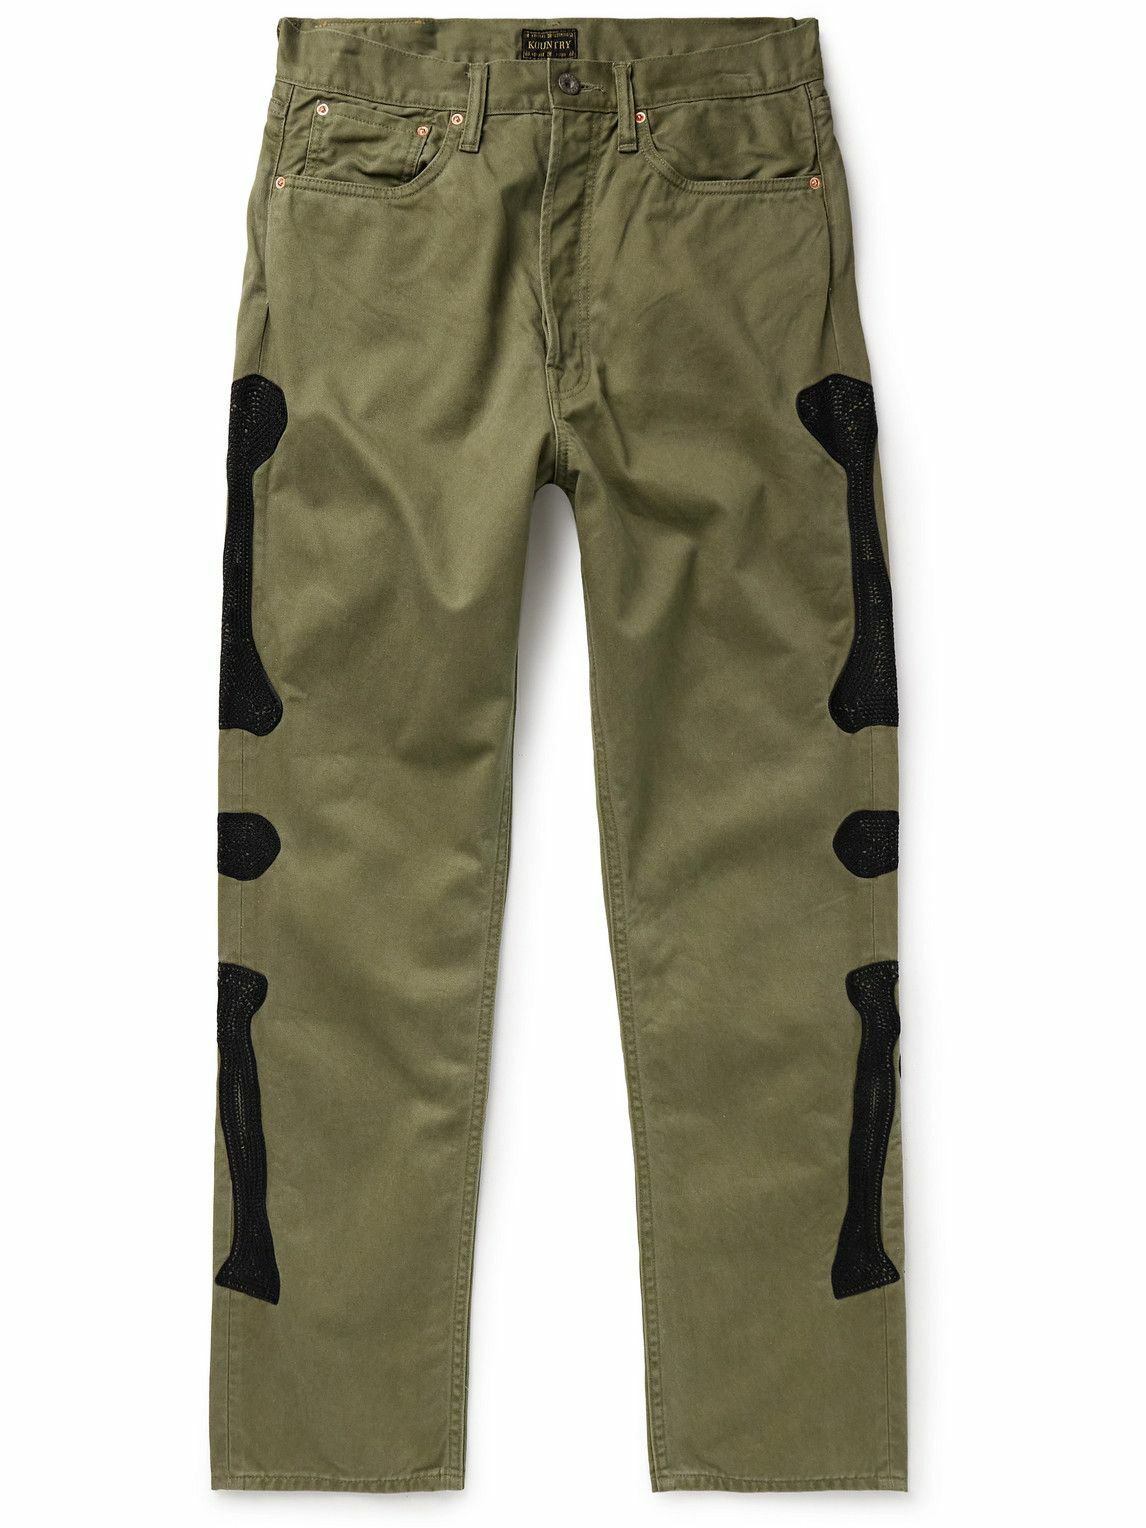 Photo: KAPITAL - Mexican Tuxedo Okagilly Slim-Fit Crochet-Trimmed Cotton-Twill Chinos - Green